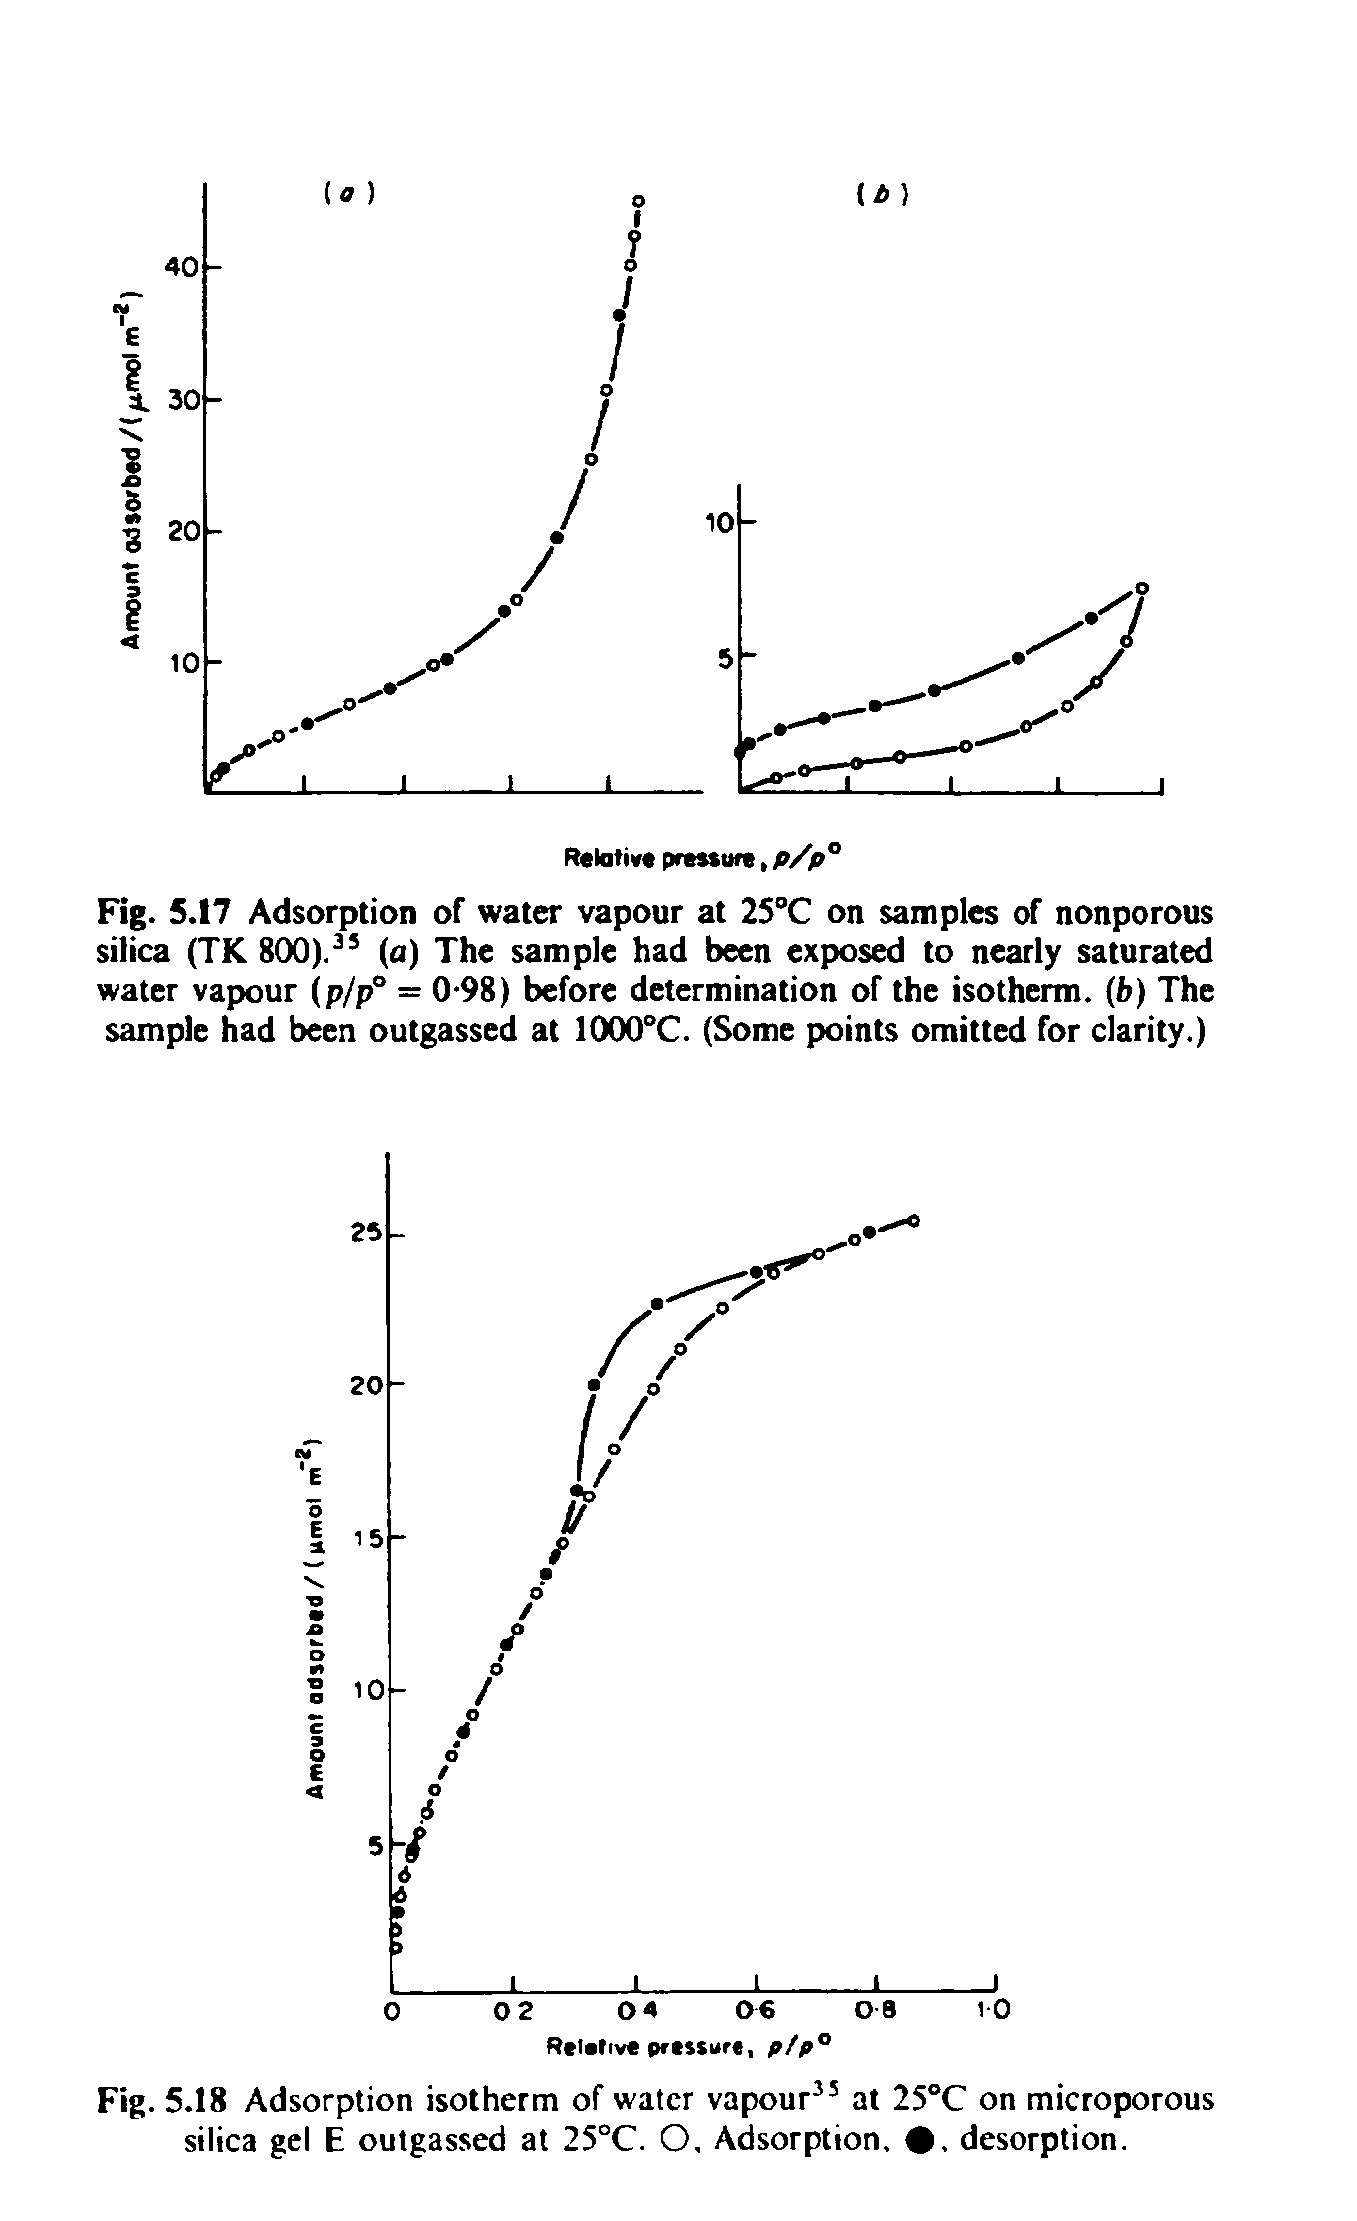 Fig. 5.18 Adsorption isotherm of water vapour at 25°C on microporous silica gel E outgassed at 25°C. O. Adsorption,. desorption.